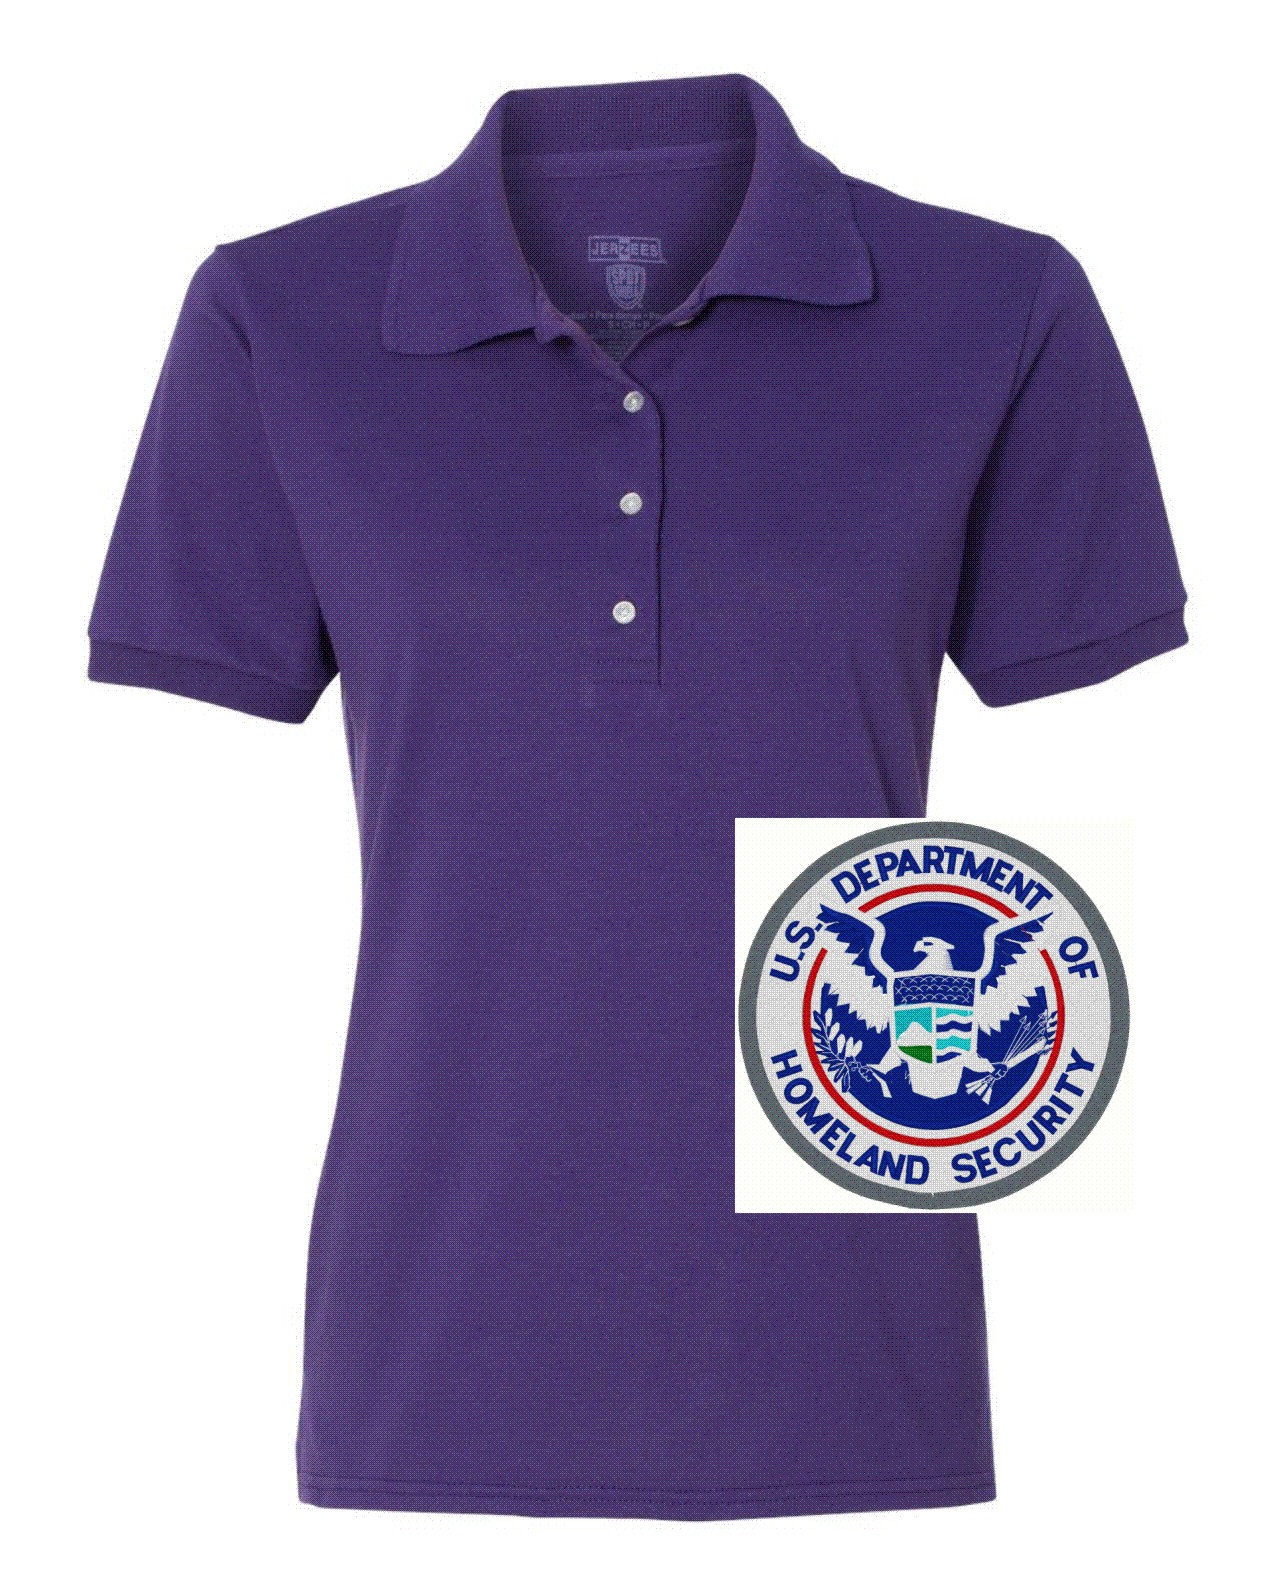 DHS Logo Embroidery : Jena1